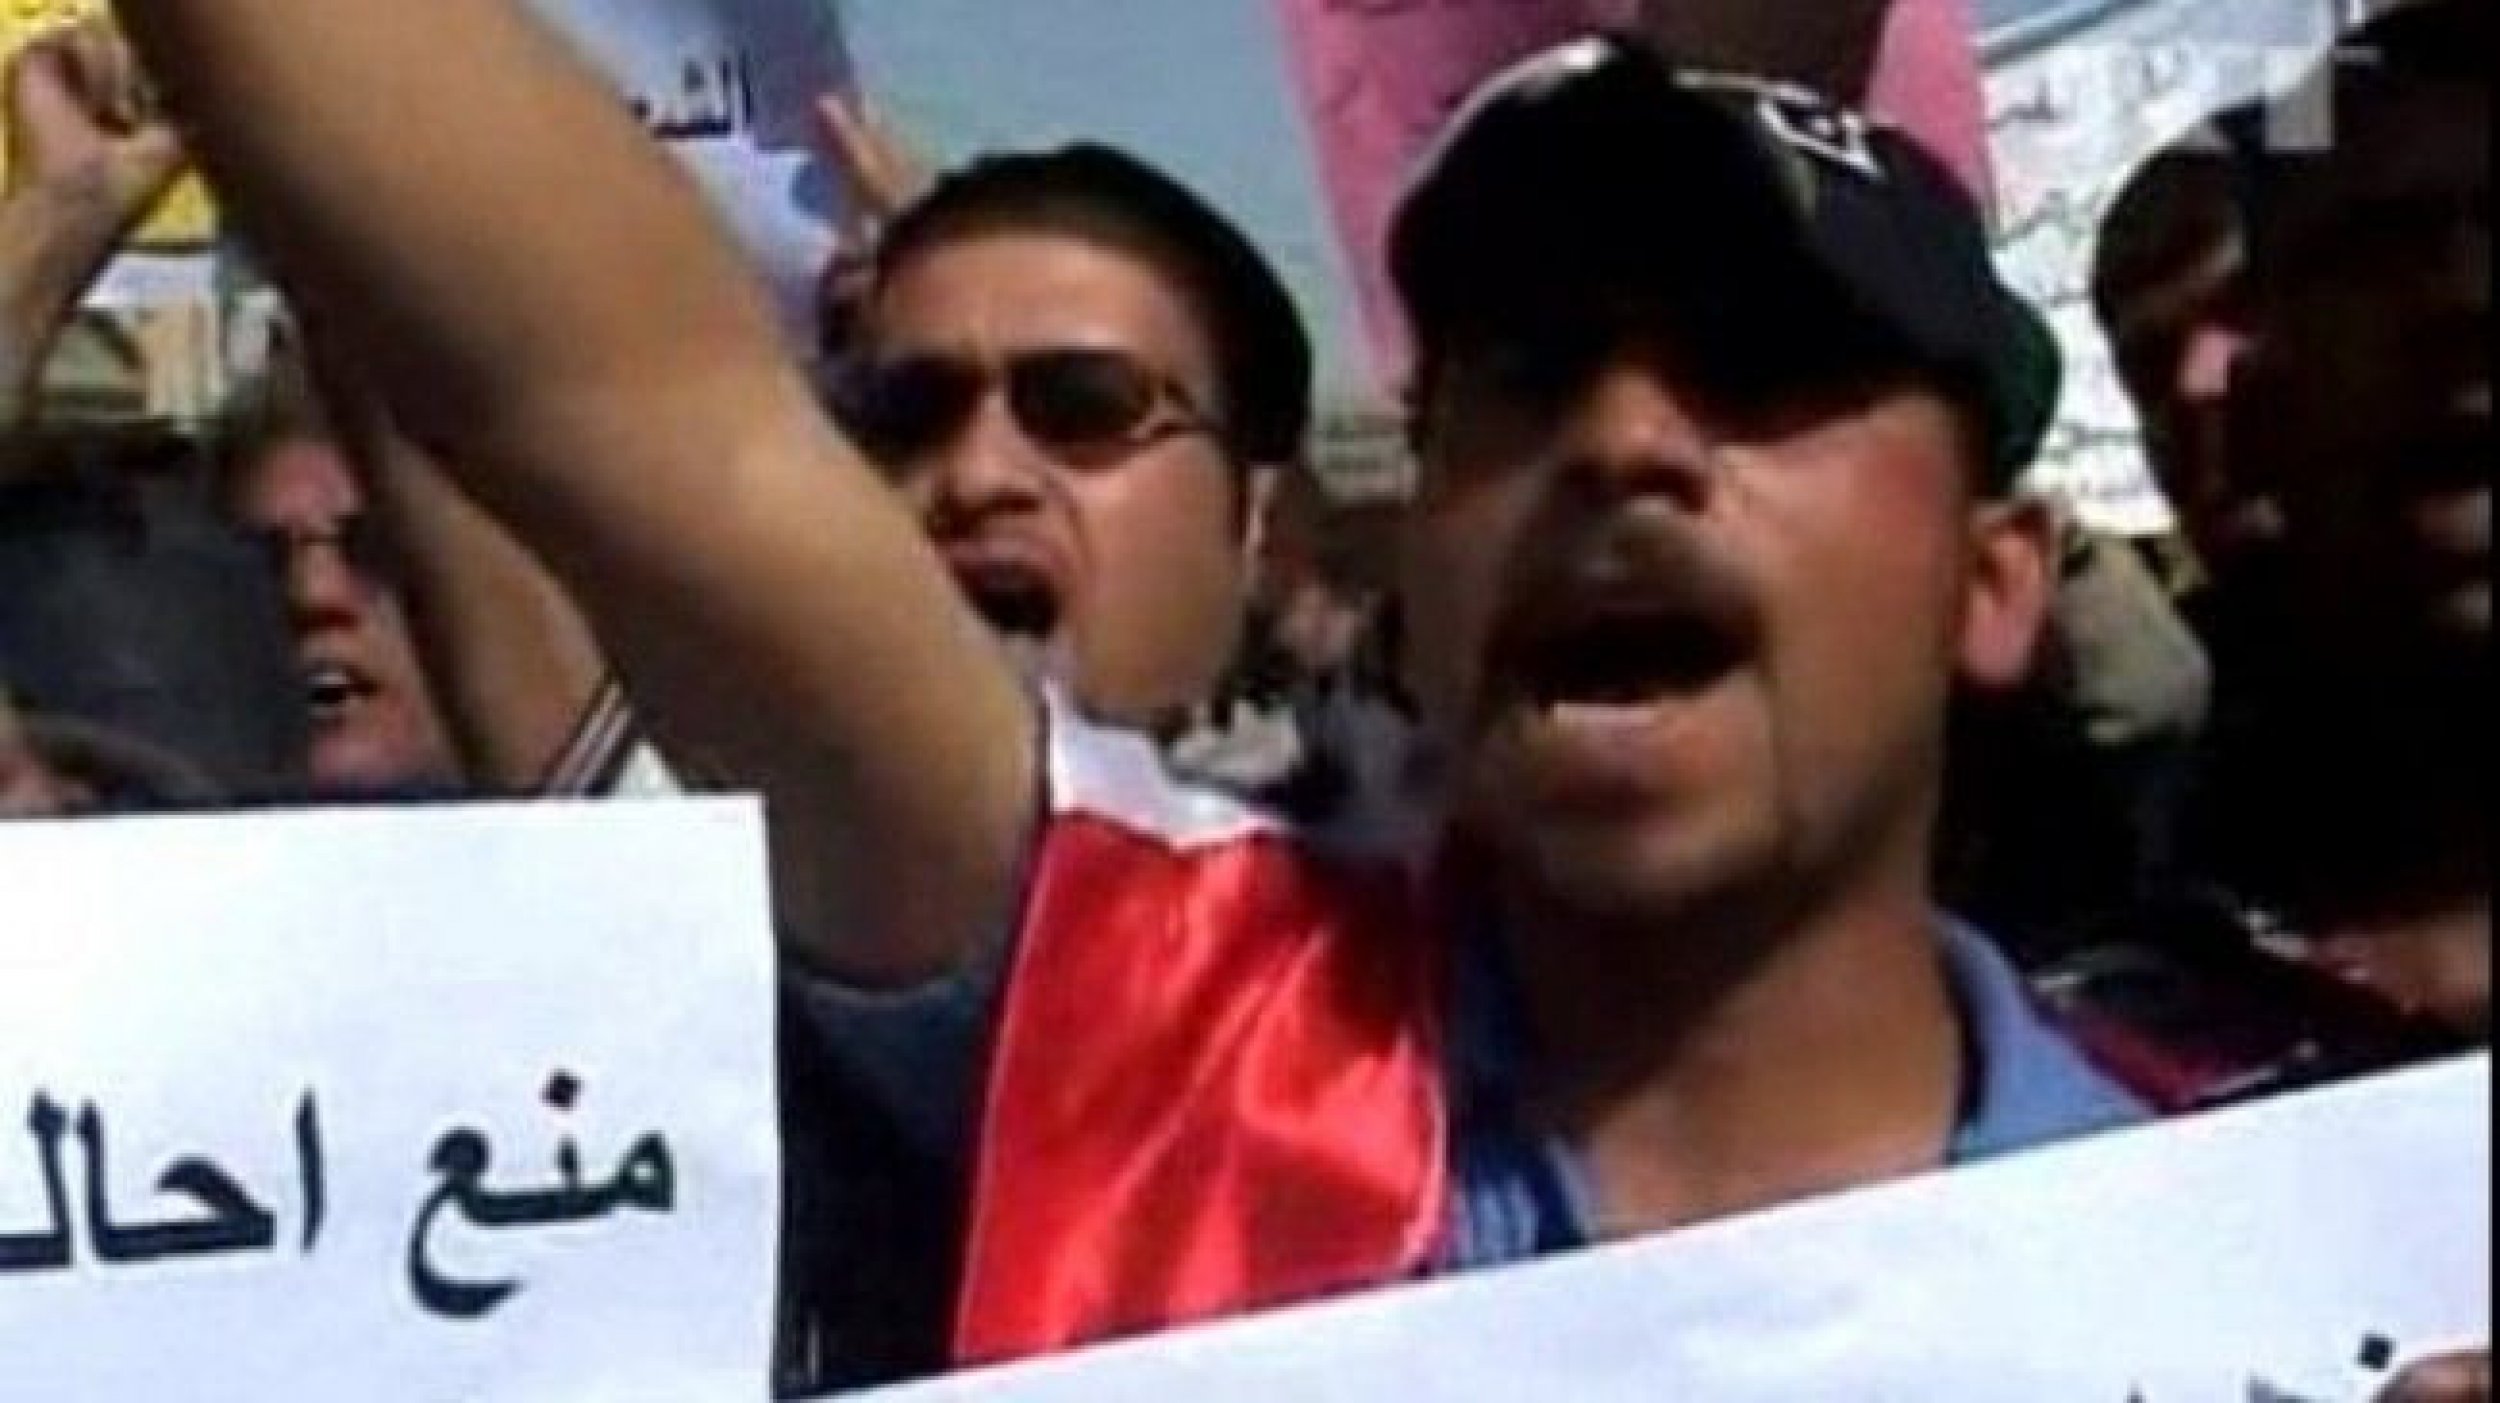 Crowds rally in Baghdad despite security presence